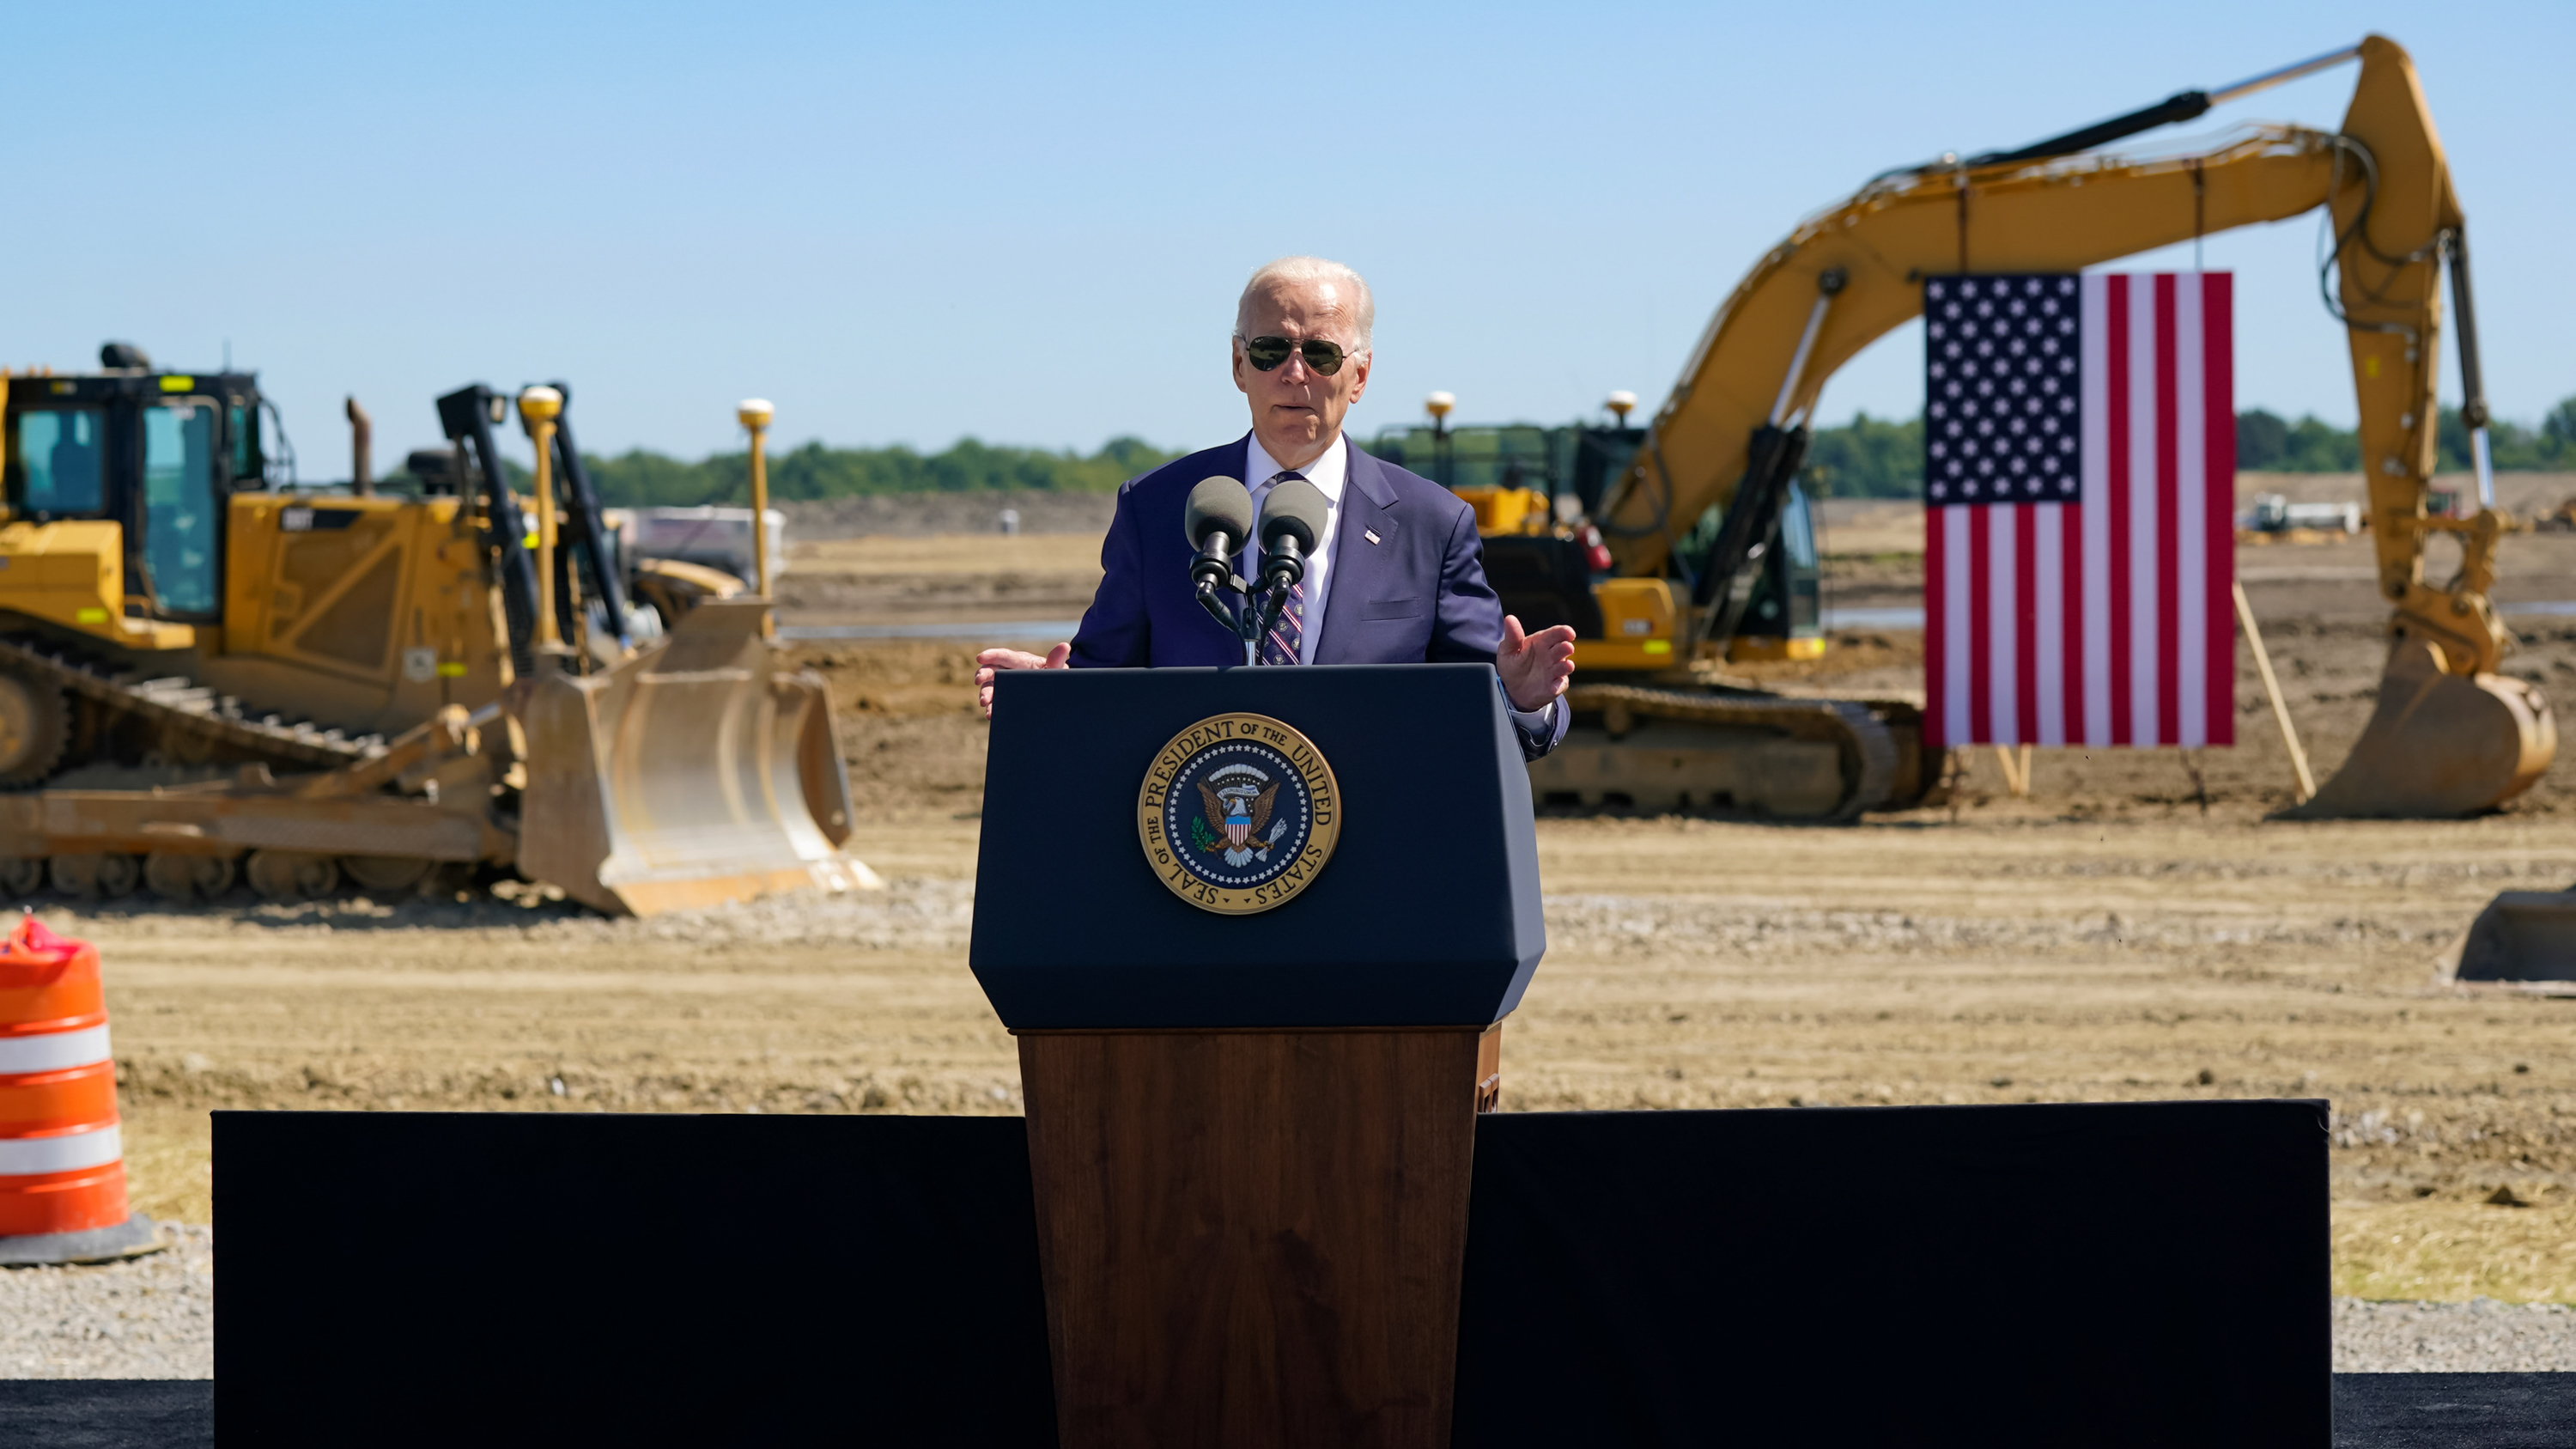 President Joe Biden speaks during a groundbreaking for a new Intel computer chip facility.